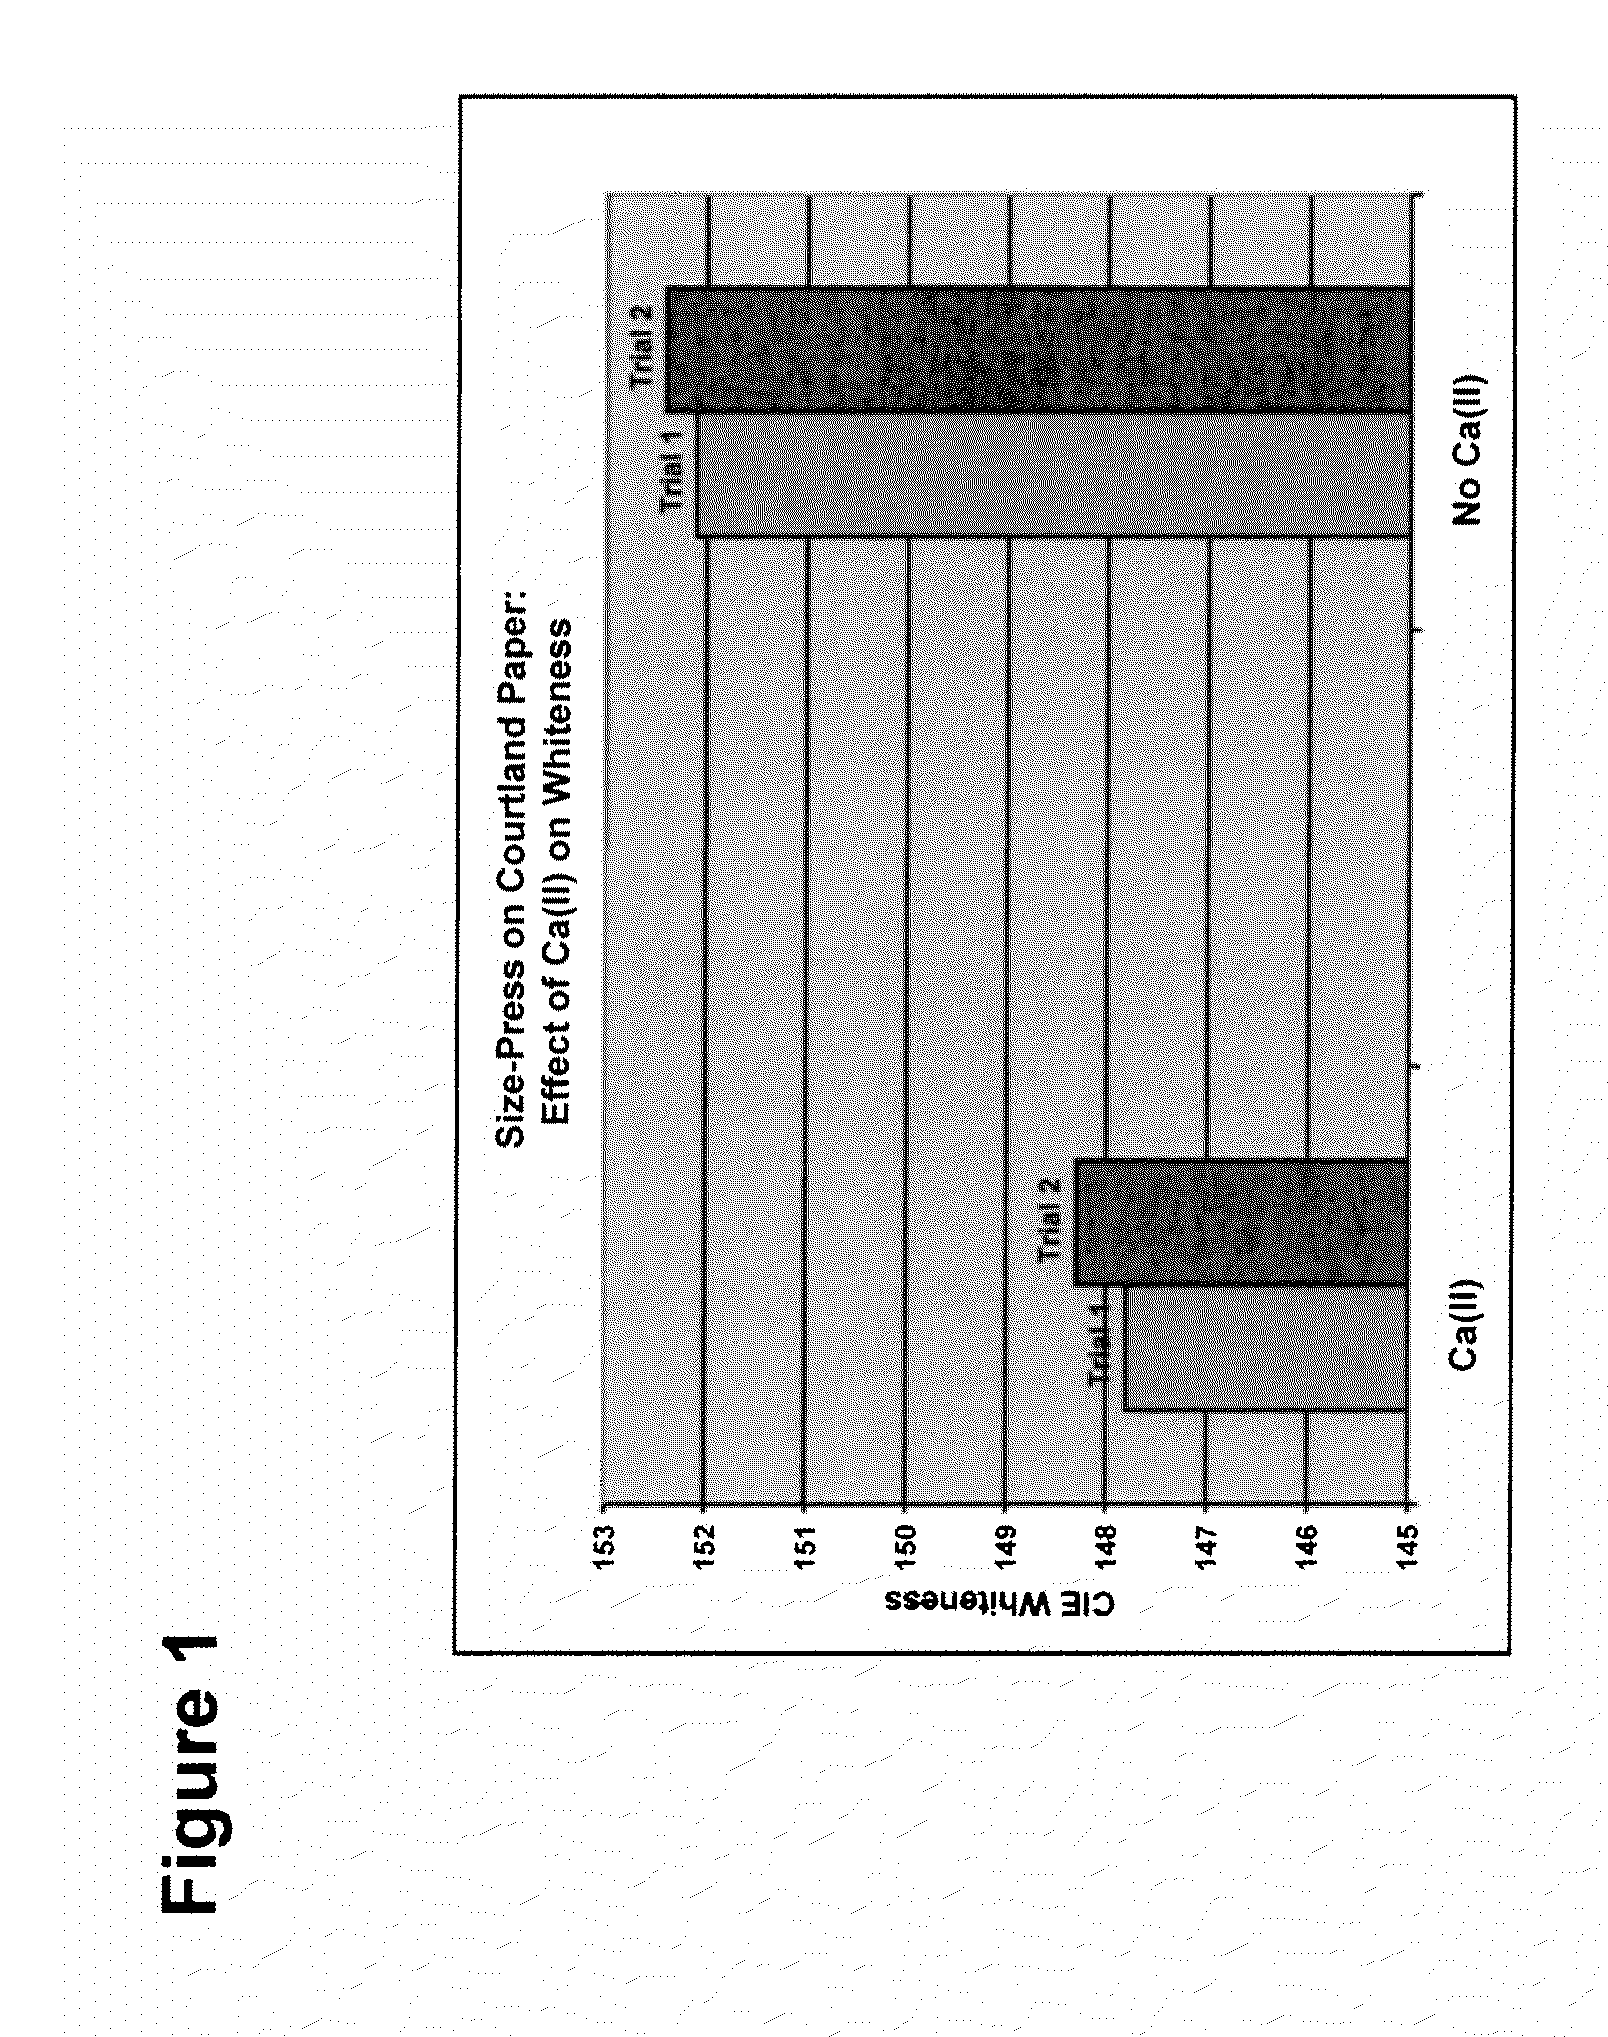 Composition and recording sheet with improved optical properties